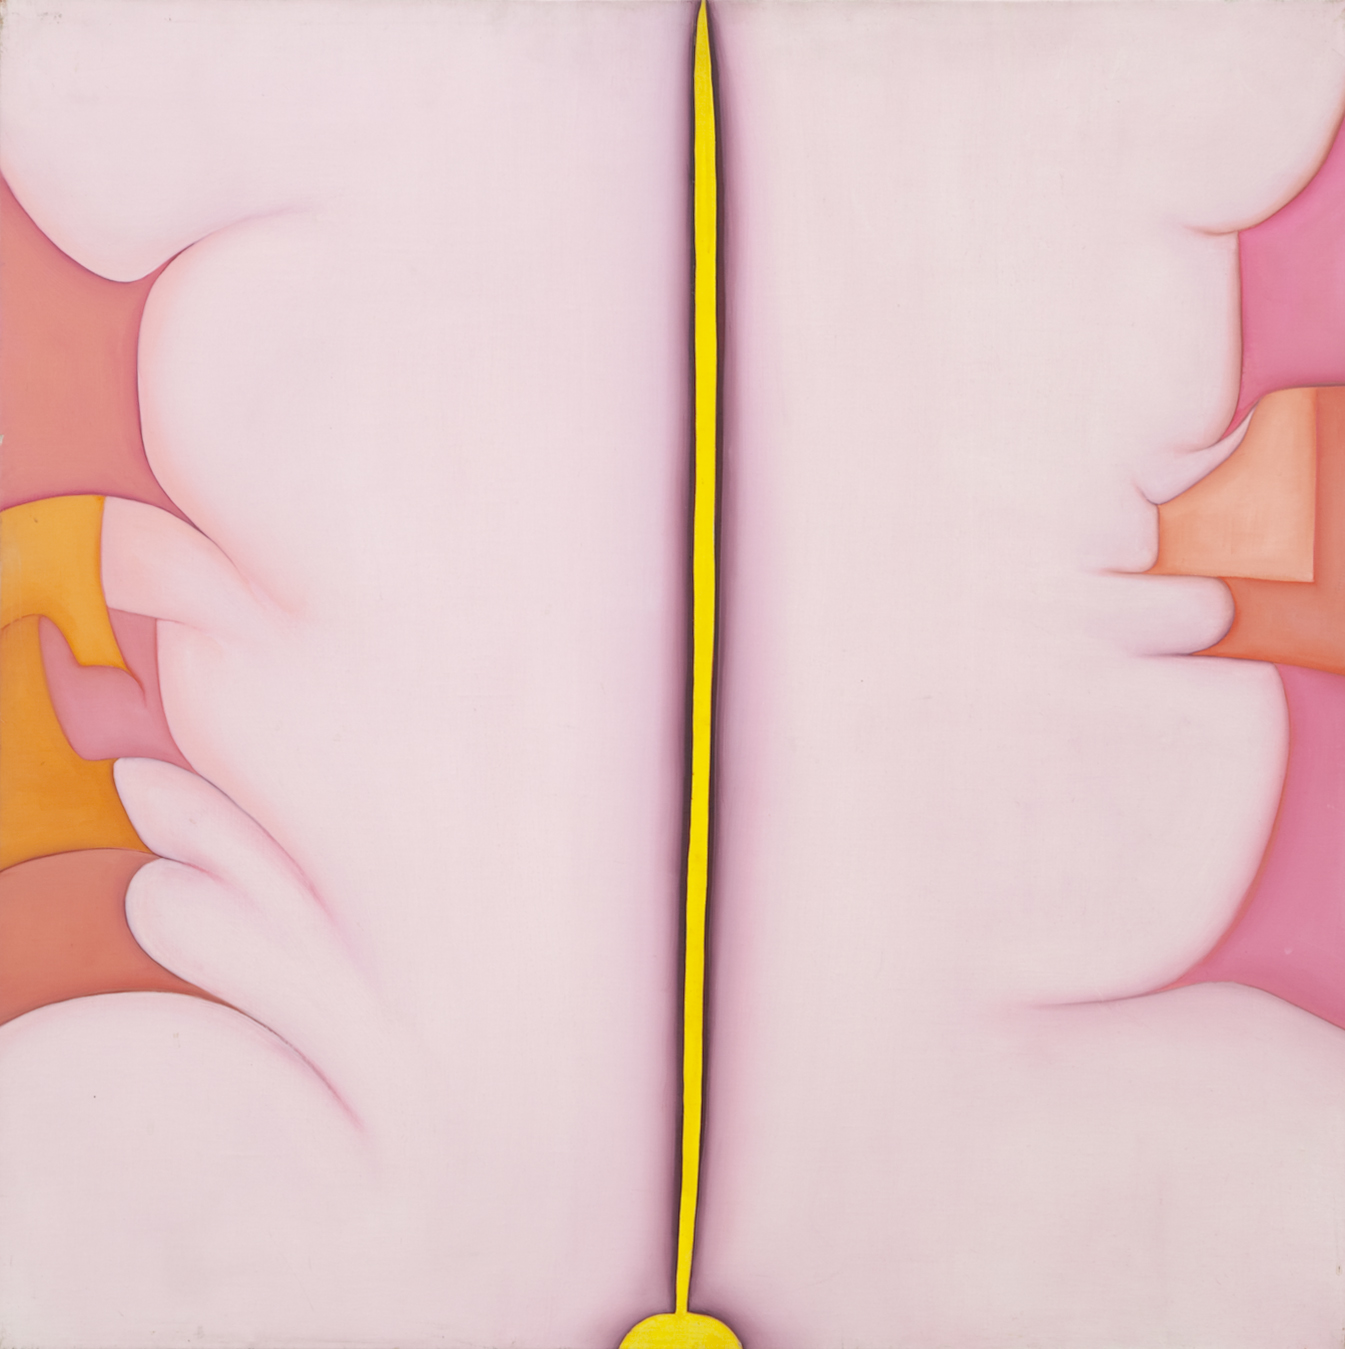 Two light pink figures facing the opposite direction, split by a yellow line.